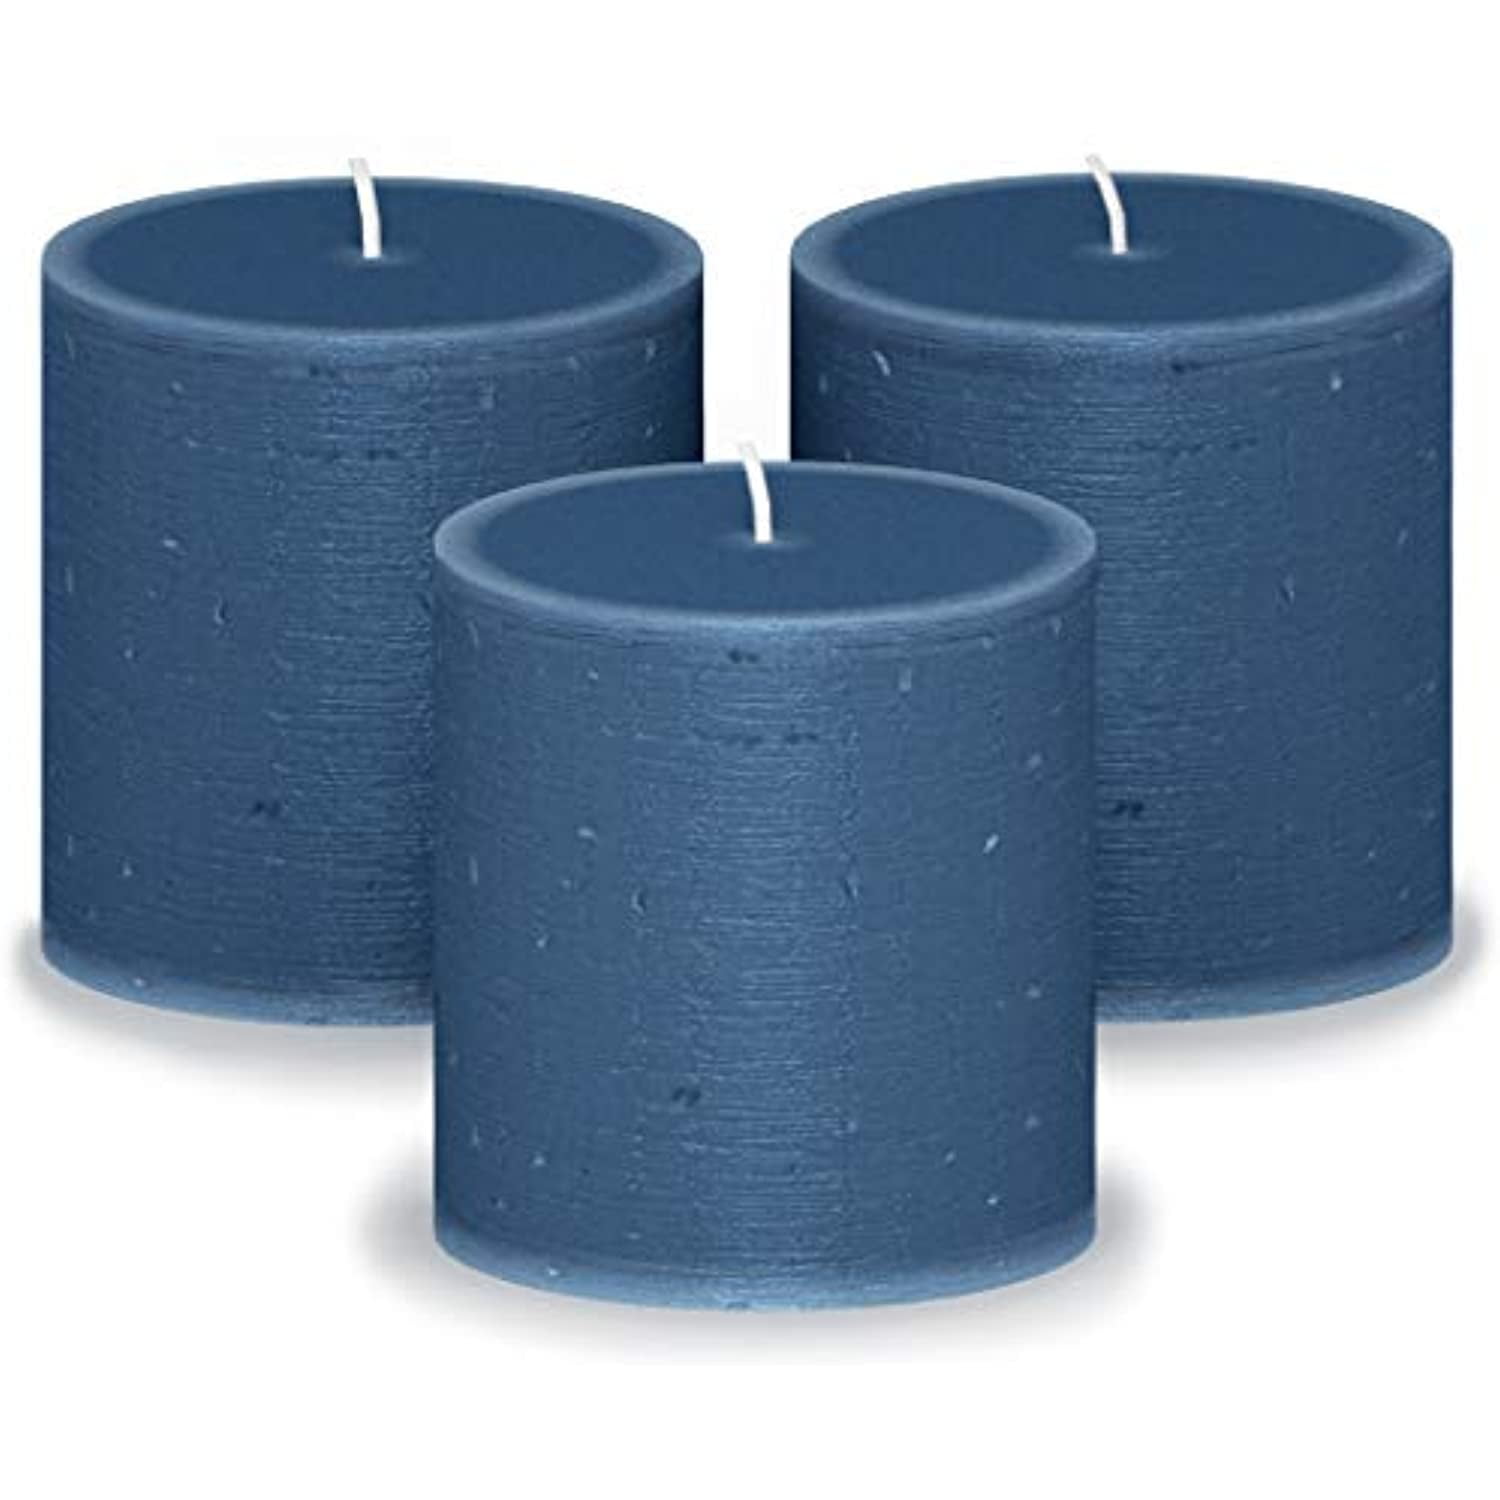 Turquoise/Teal Unscented Pillar Candles 3 x 6 Inch Set of 3 Fragrance-Free Decor 